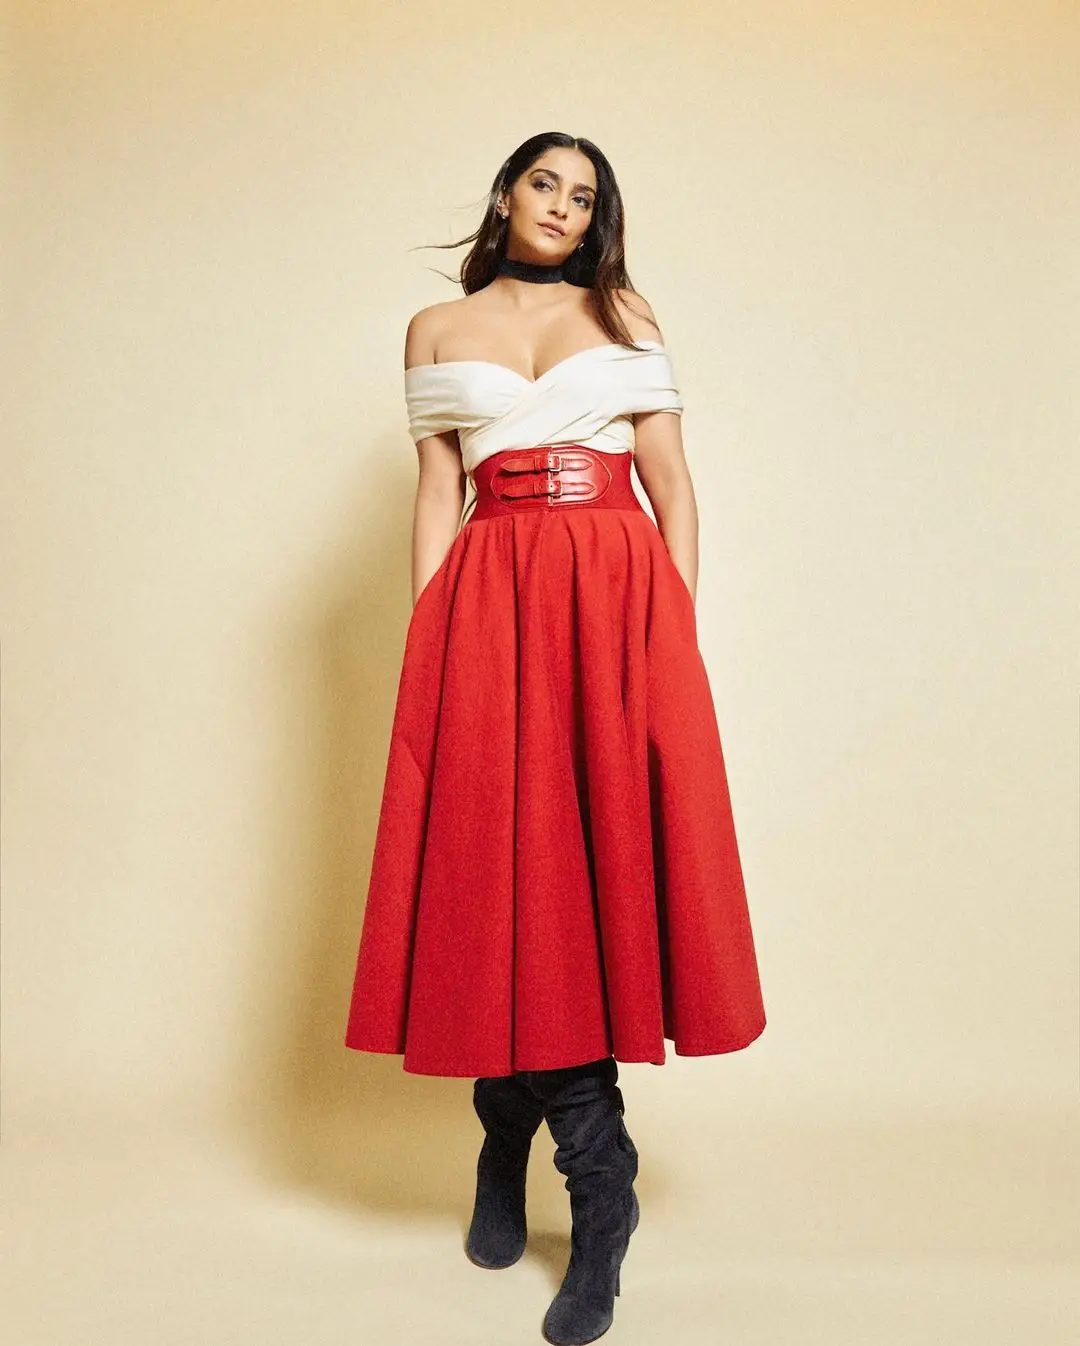 BOLLYWOOD ACTRESS SONAM KAPOOR PHOTOSHOOT IN RED GOWN 2